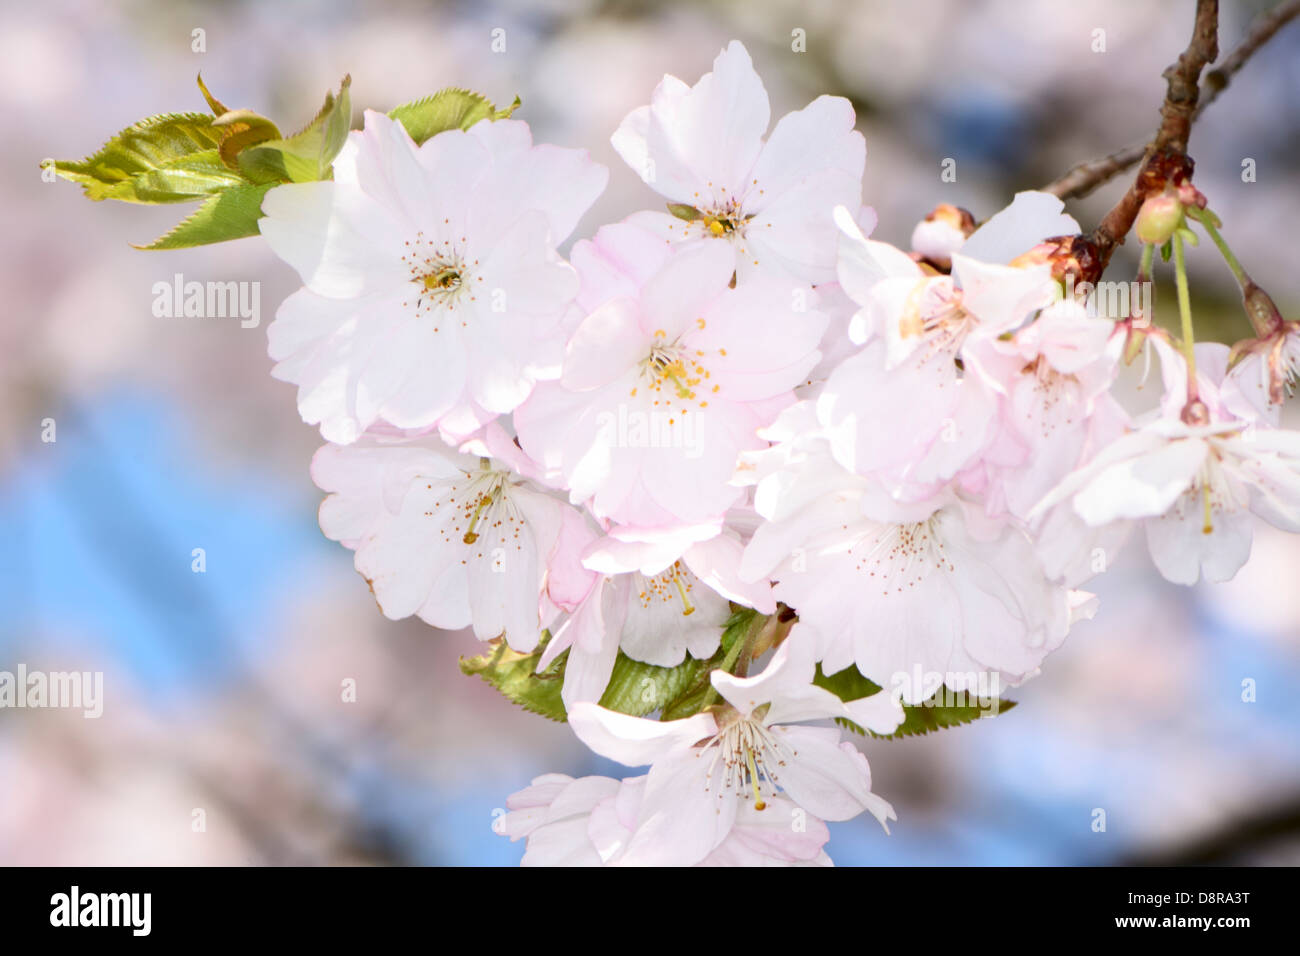 Twig with white cherry blossoms Stock Photo